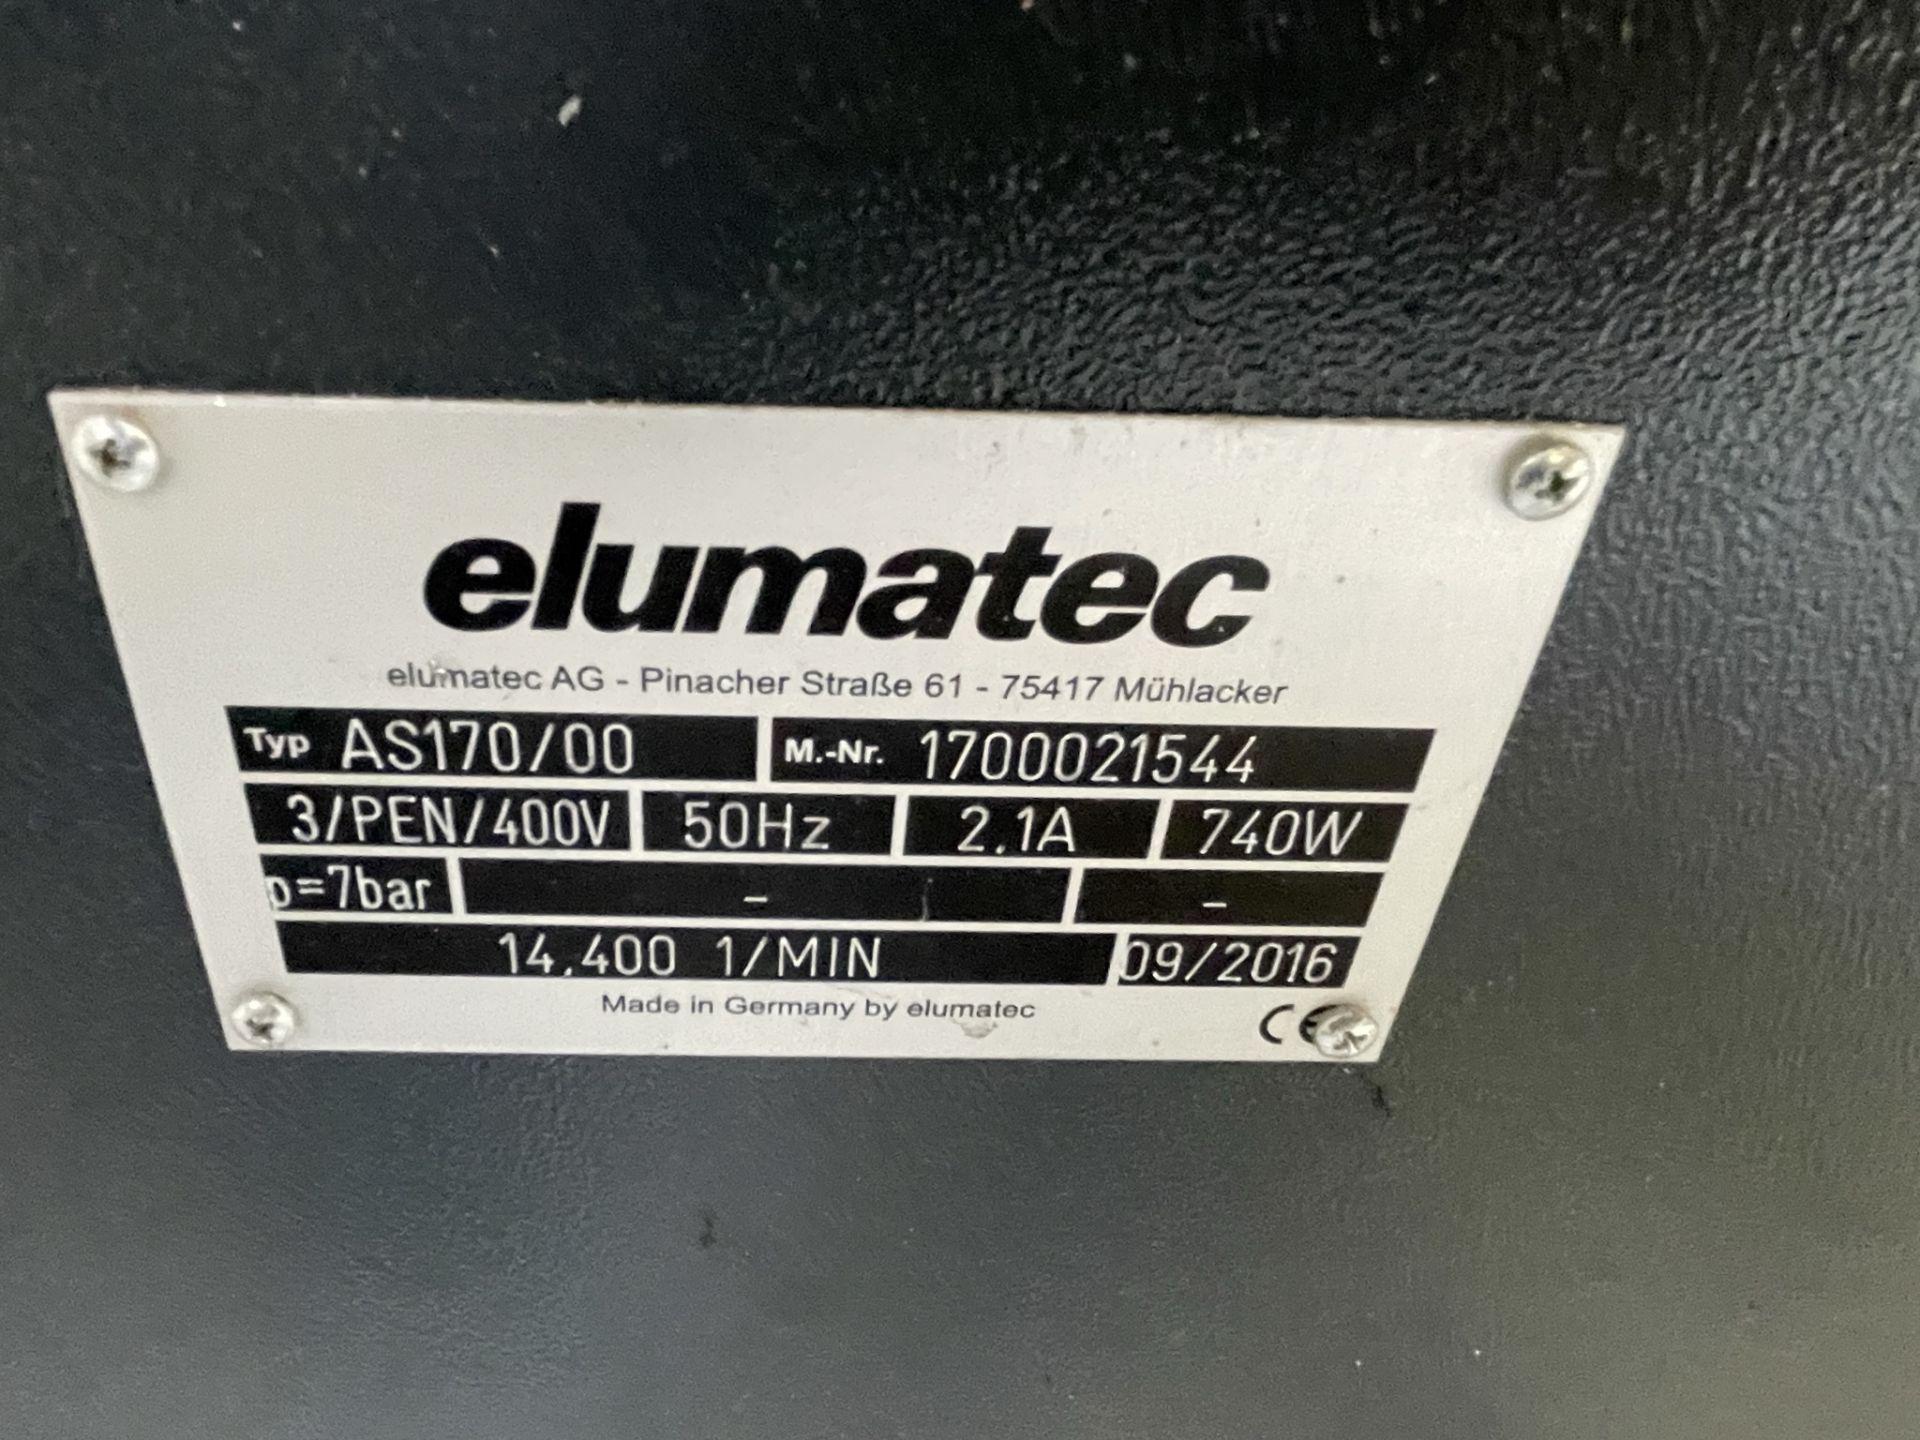 Elumatec, AS170/00 single spindle copy router, Serial No. 1700021544 (DOM: 2016) - Image 6 of 6